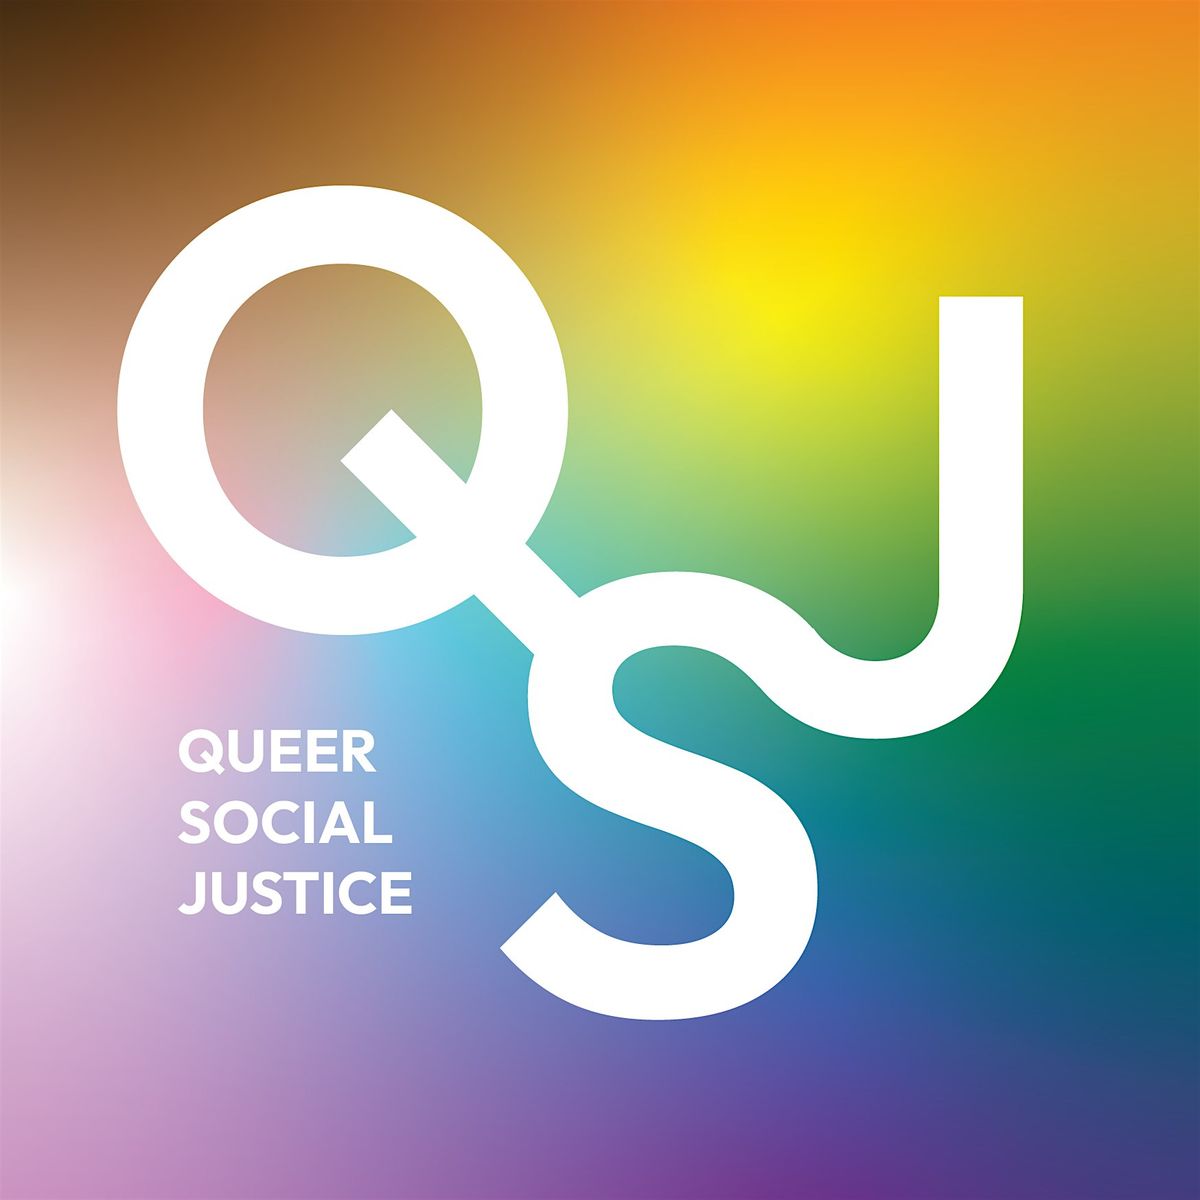 Queer and the Cost of Living Crisis